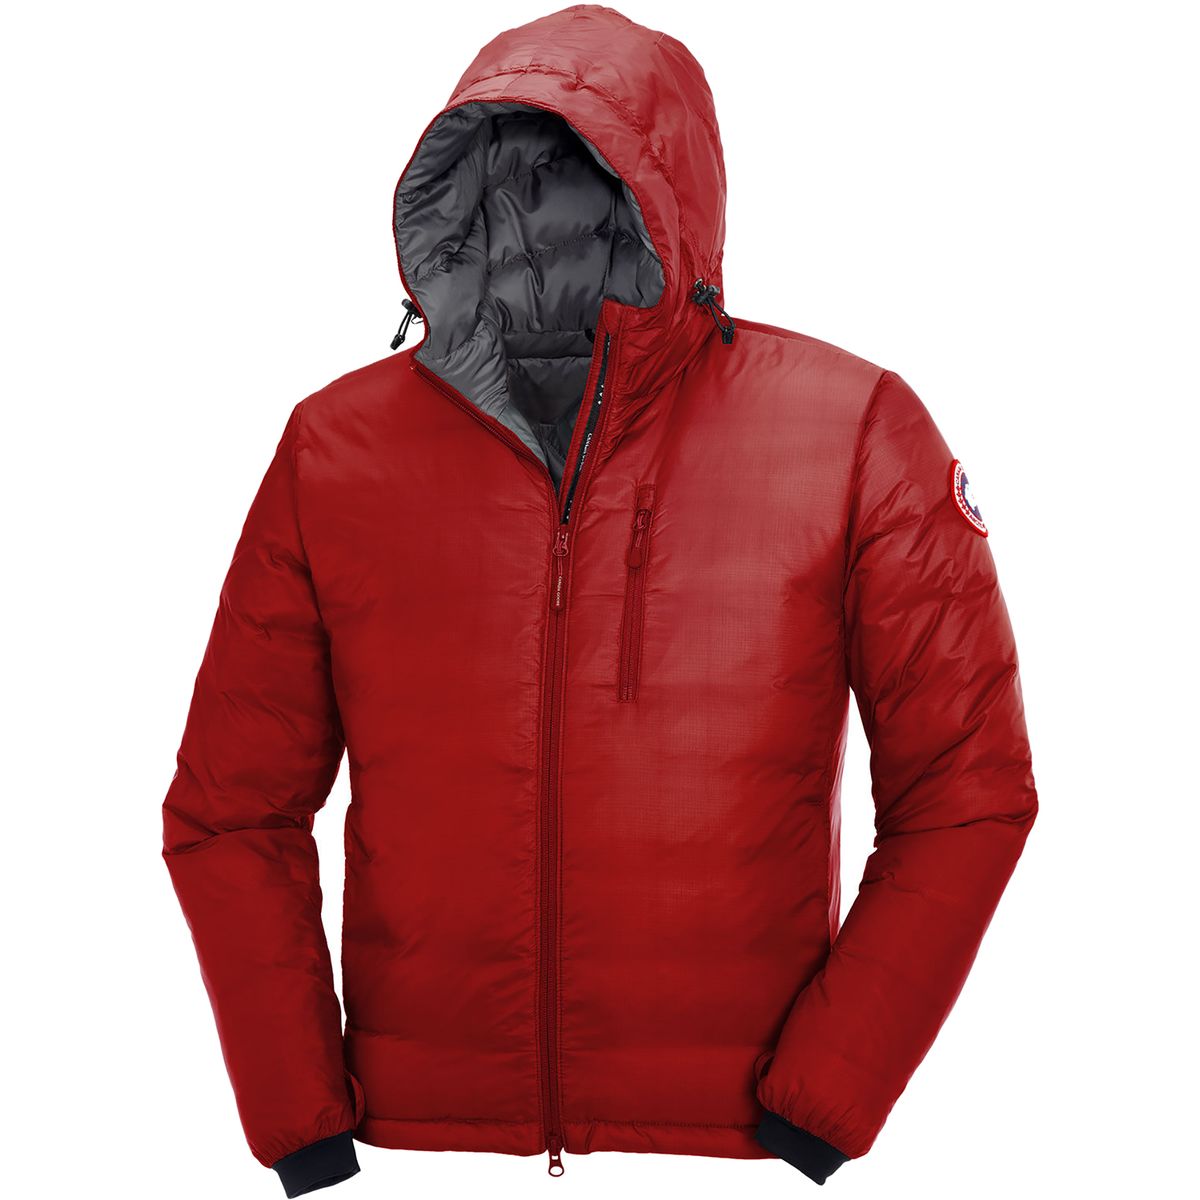 authentic canadian goose jacket sale on sale store low